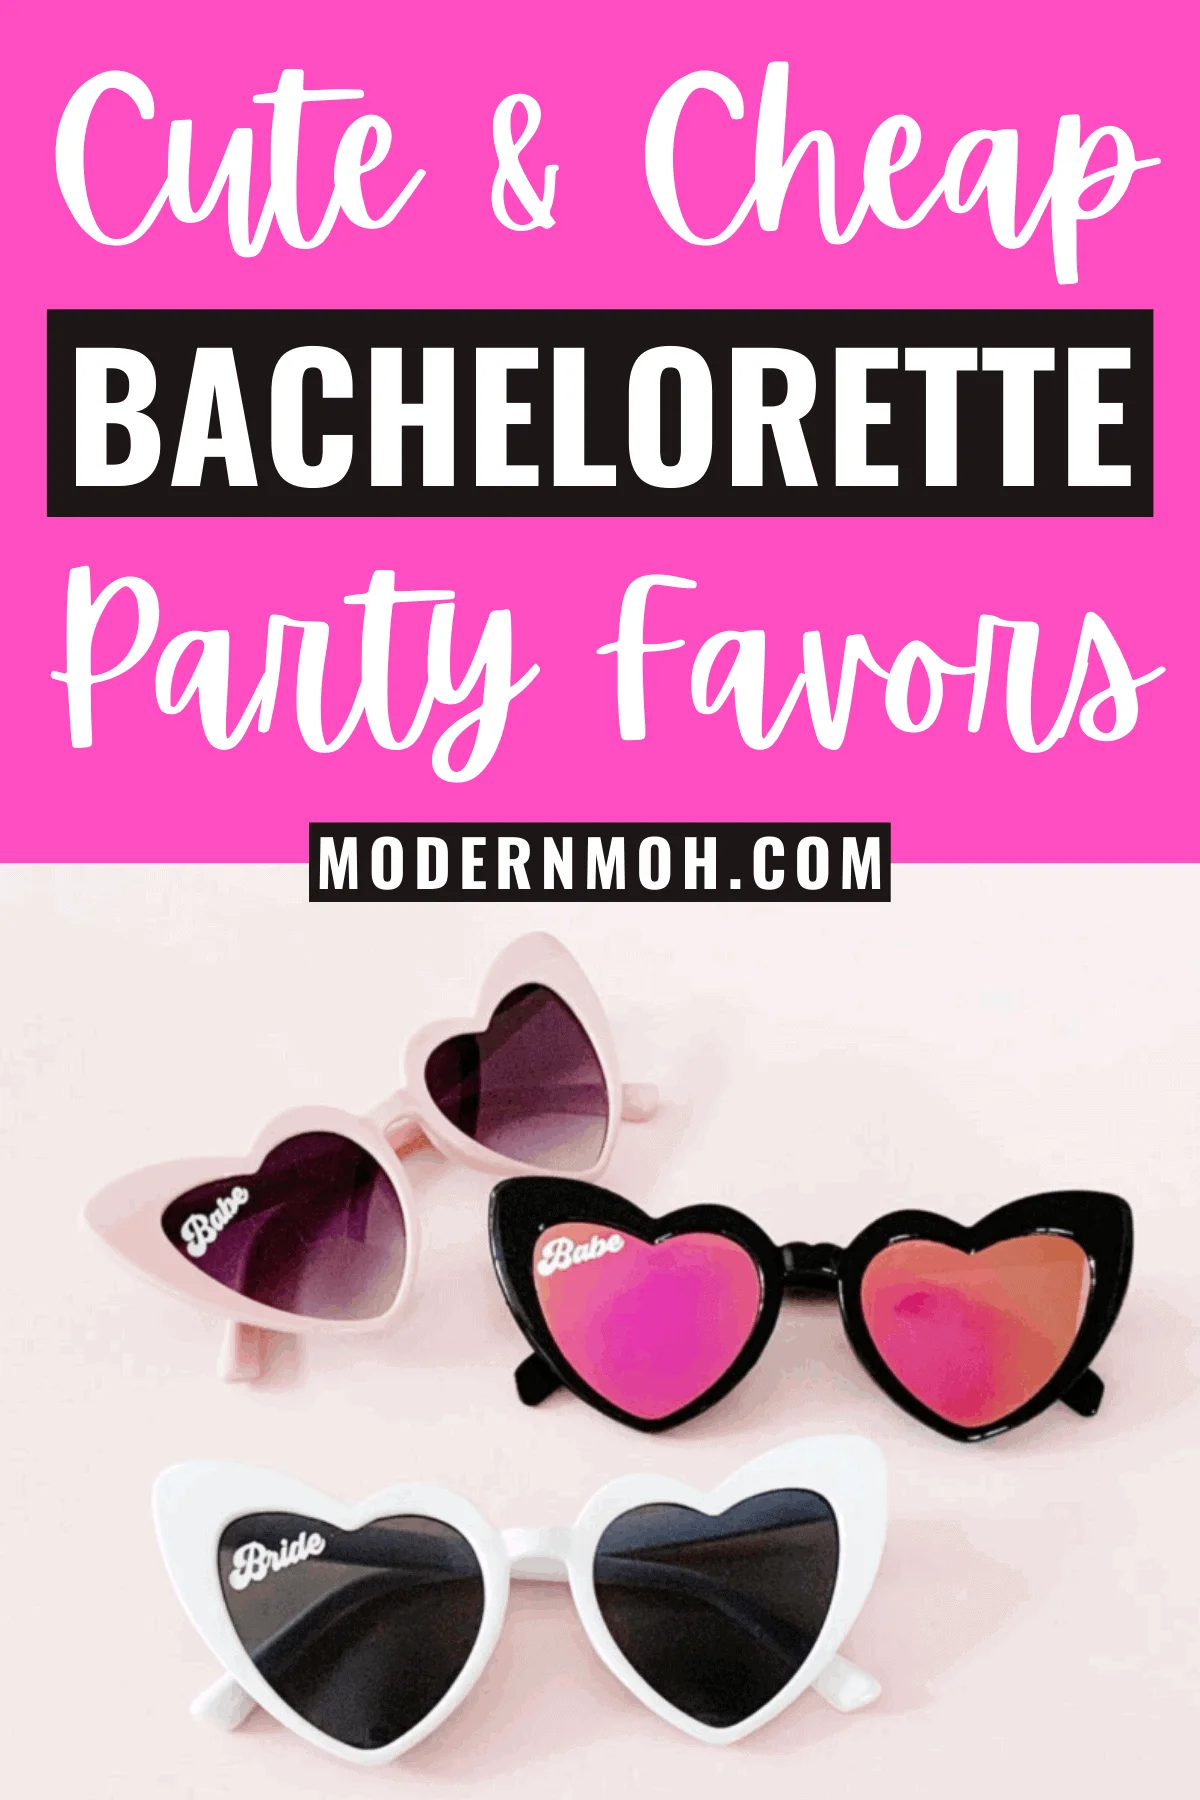 21 Bachelorette Party Favors for Your Girls Weekend